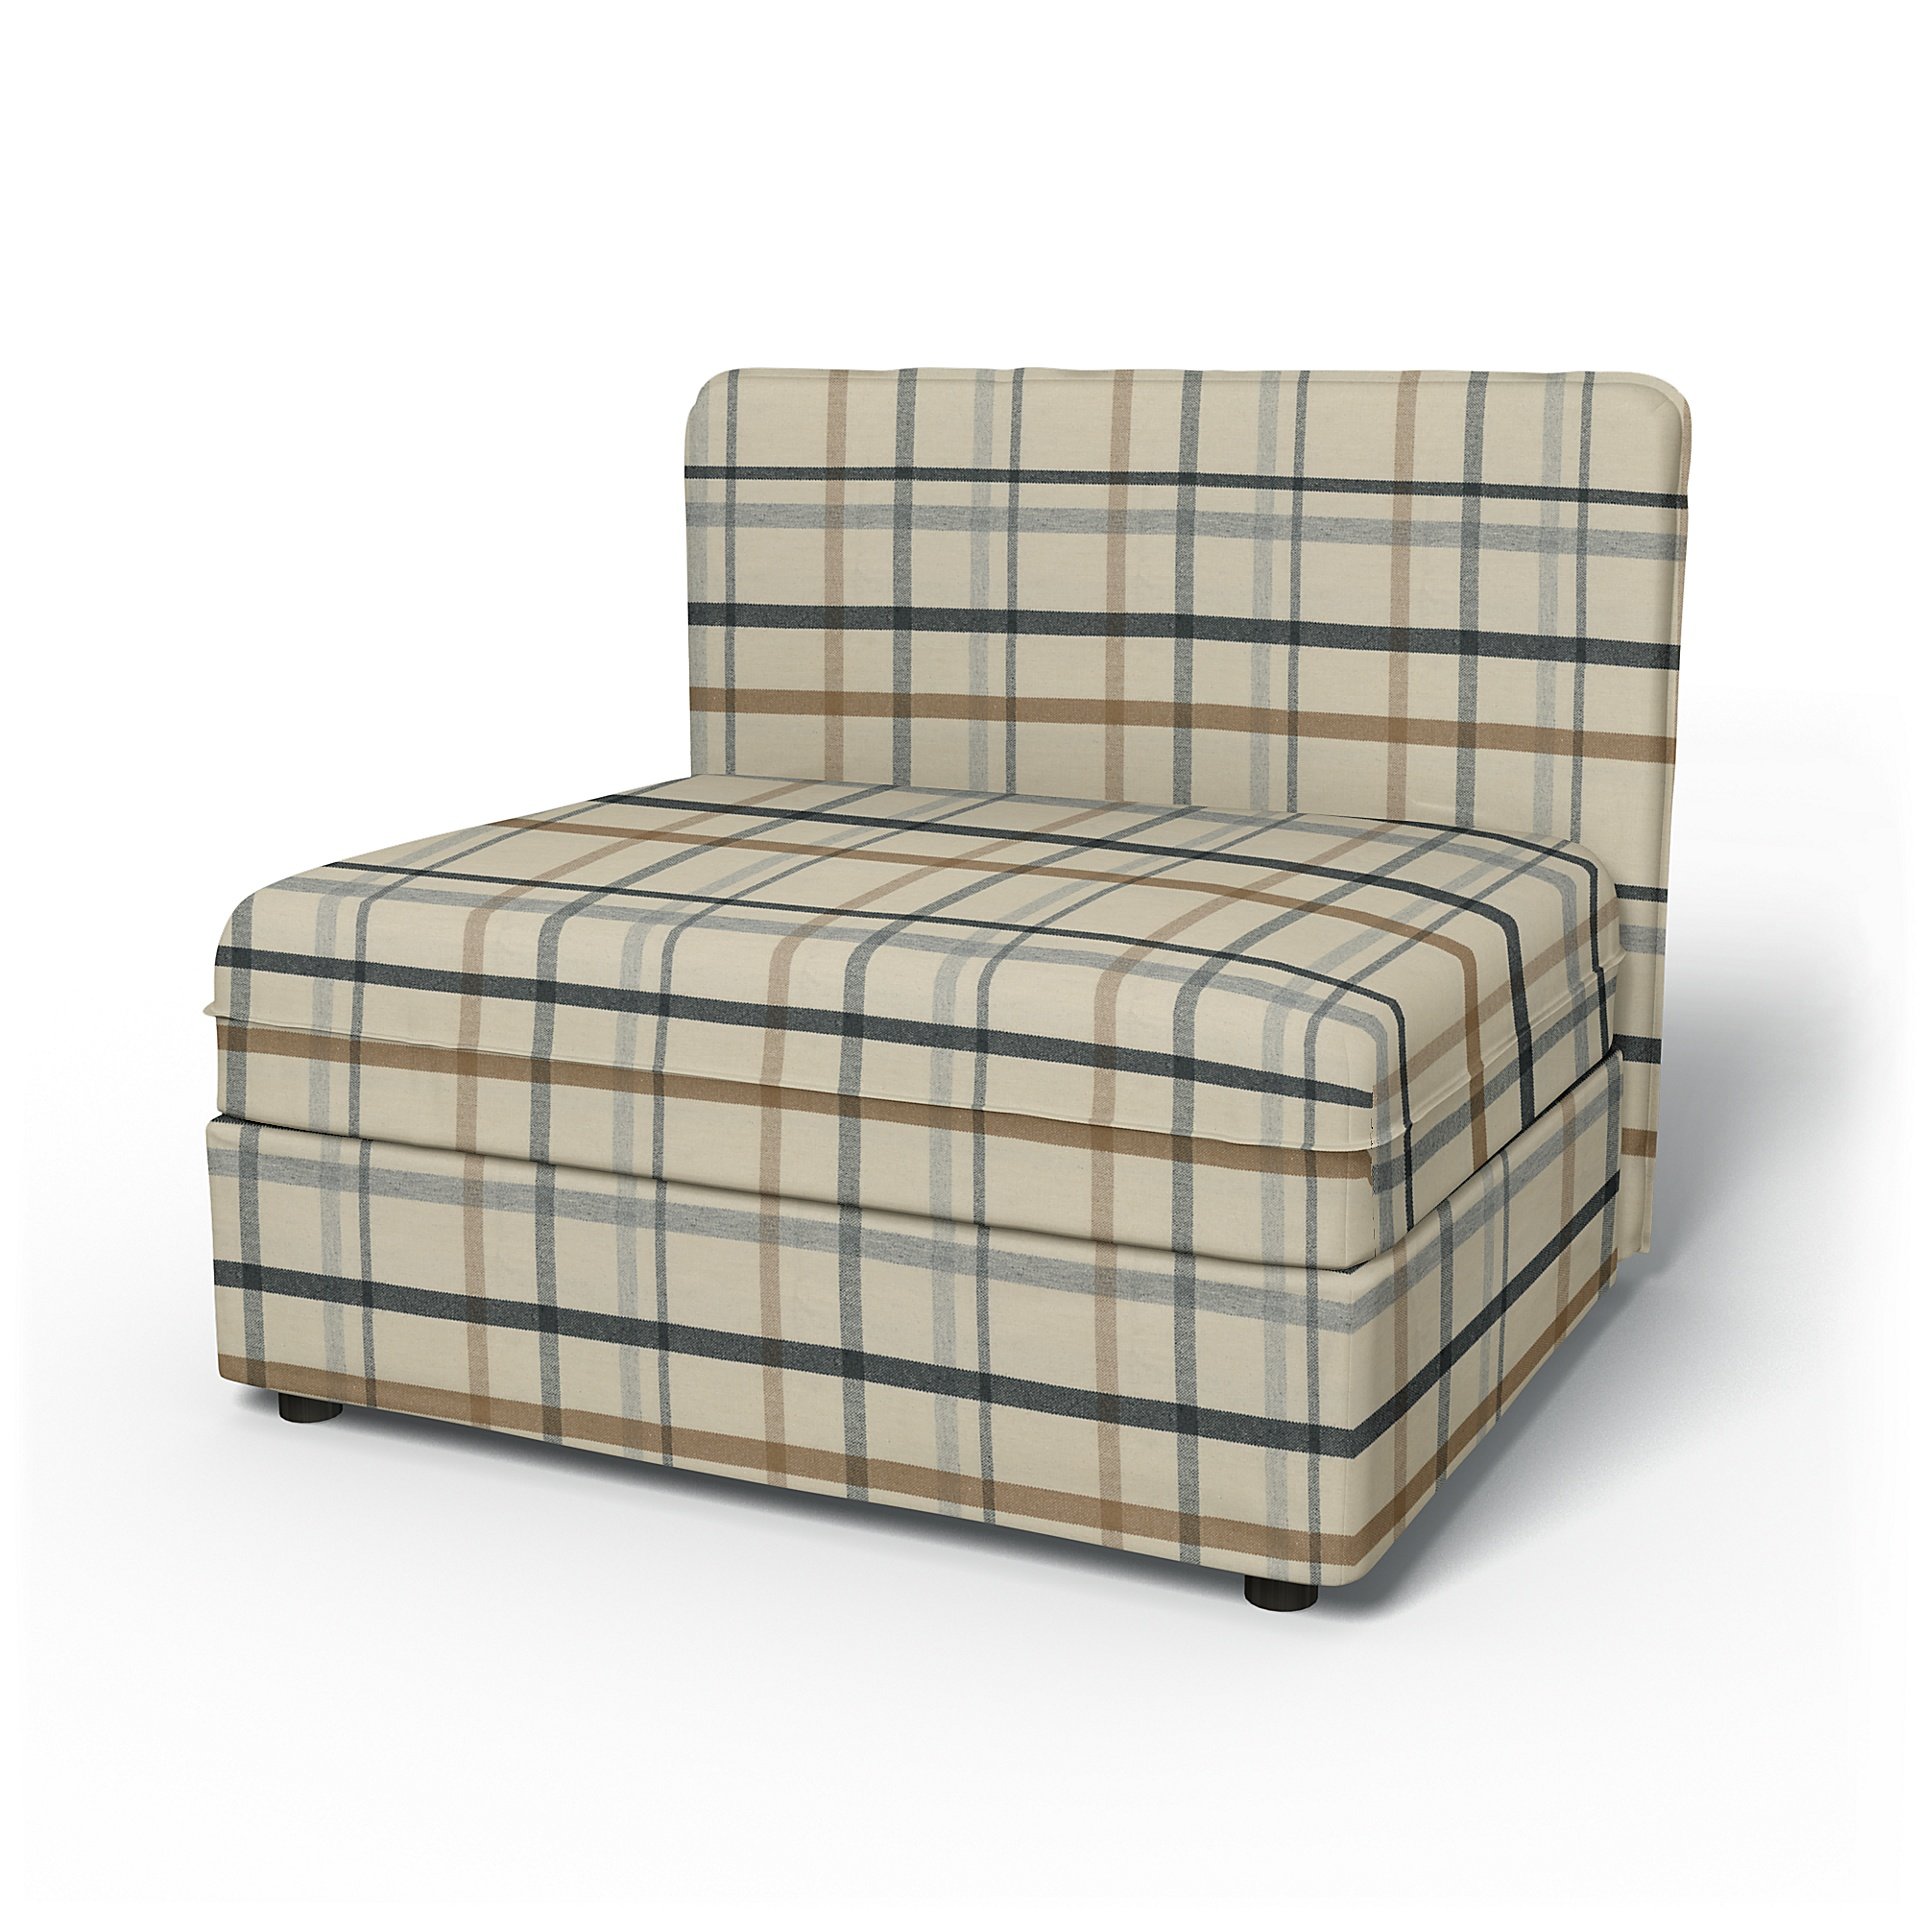 IKEA - Vallentuna Seat Module with Low Back Cover 100x80cm 39x32in, Fawn Brown, Wool - Bemz